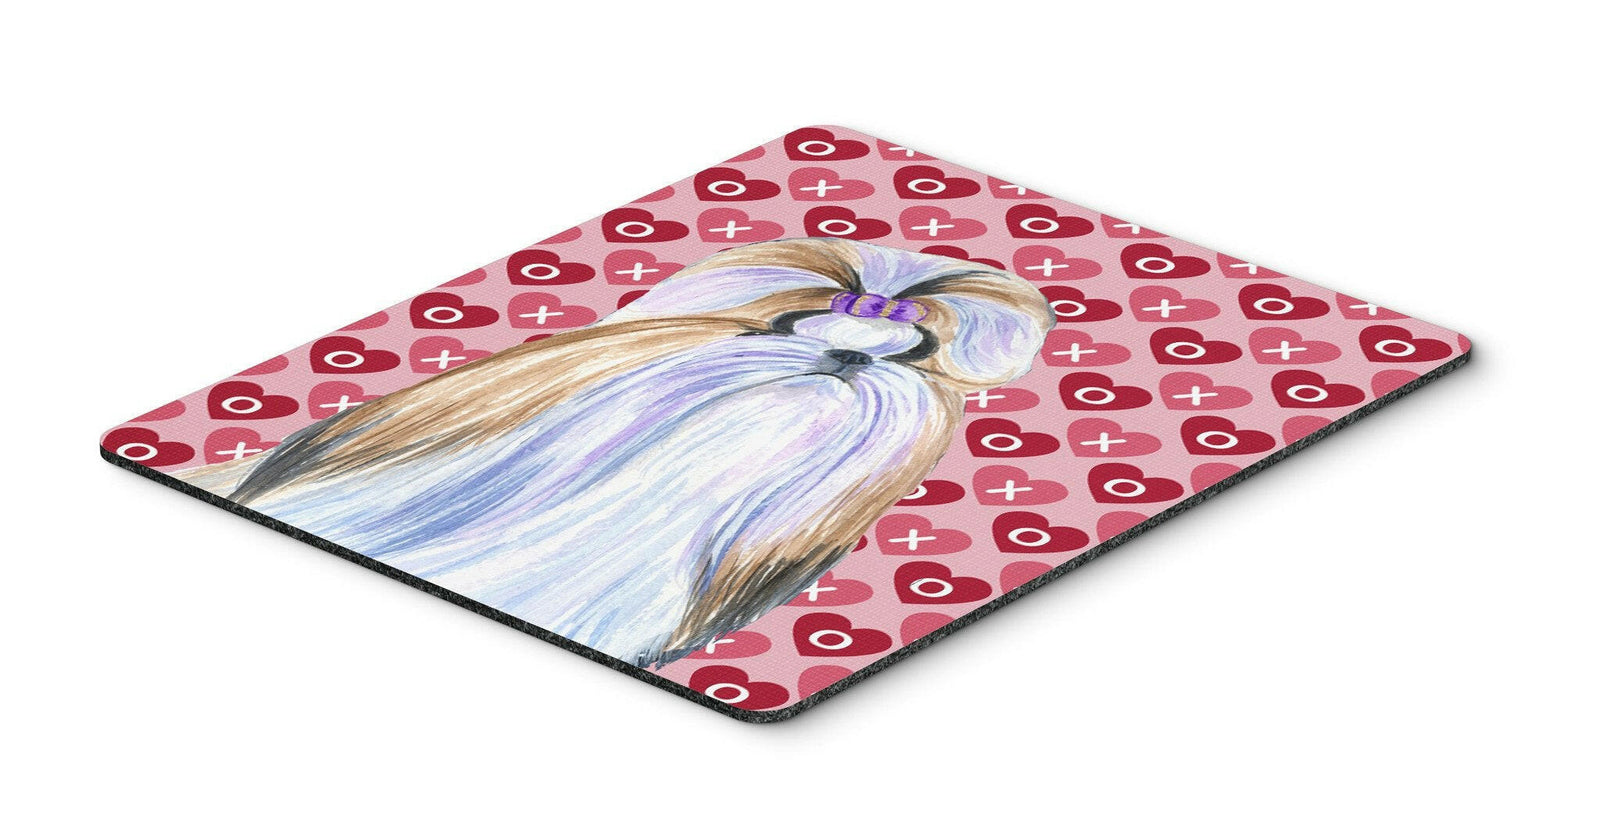 Shih Tzu Hearts Love and Valentine's Day Portrait Mouse Pad, Hot Pad or Trivet by Caroline's Treasures